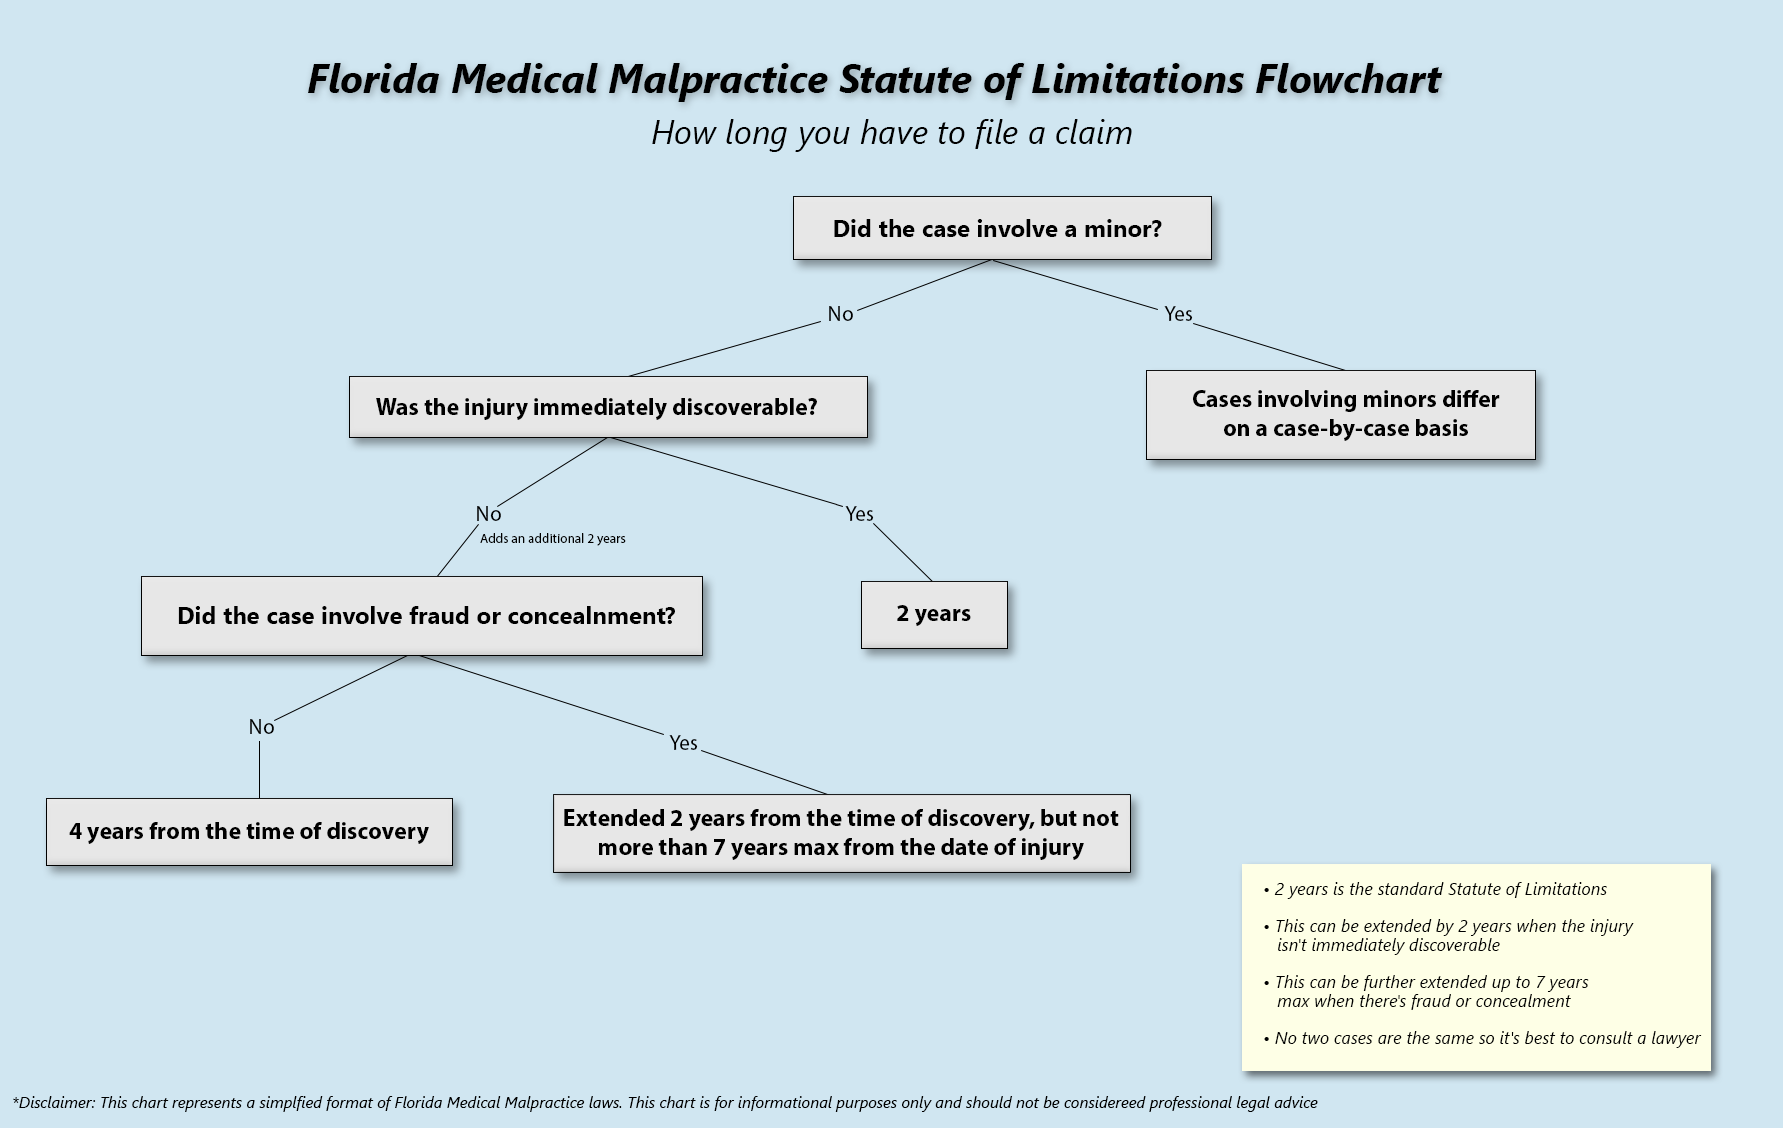 Flowchart representation of Florida medical malpractice laws regarding the statute of limitations and how long someone has to file a claim.